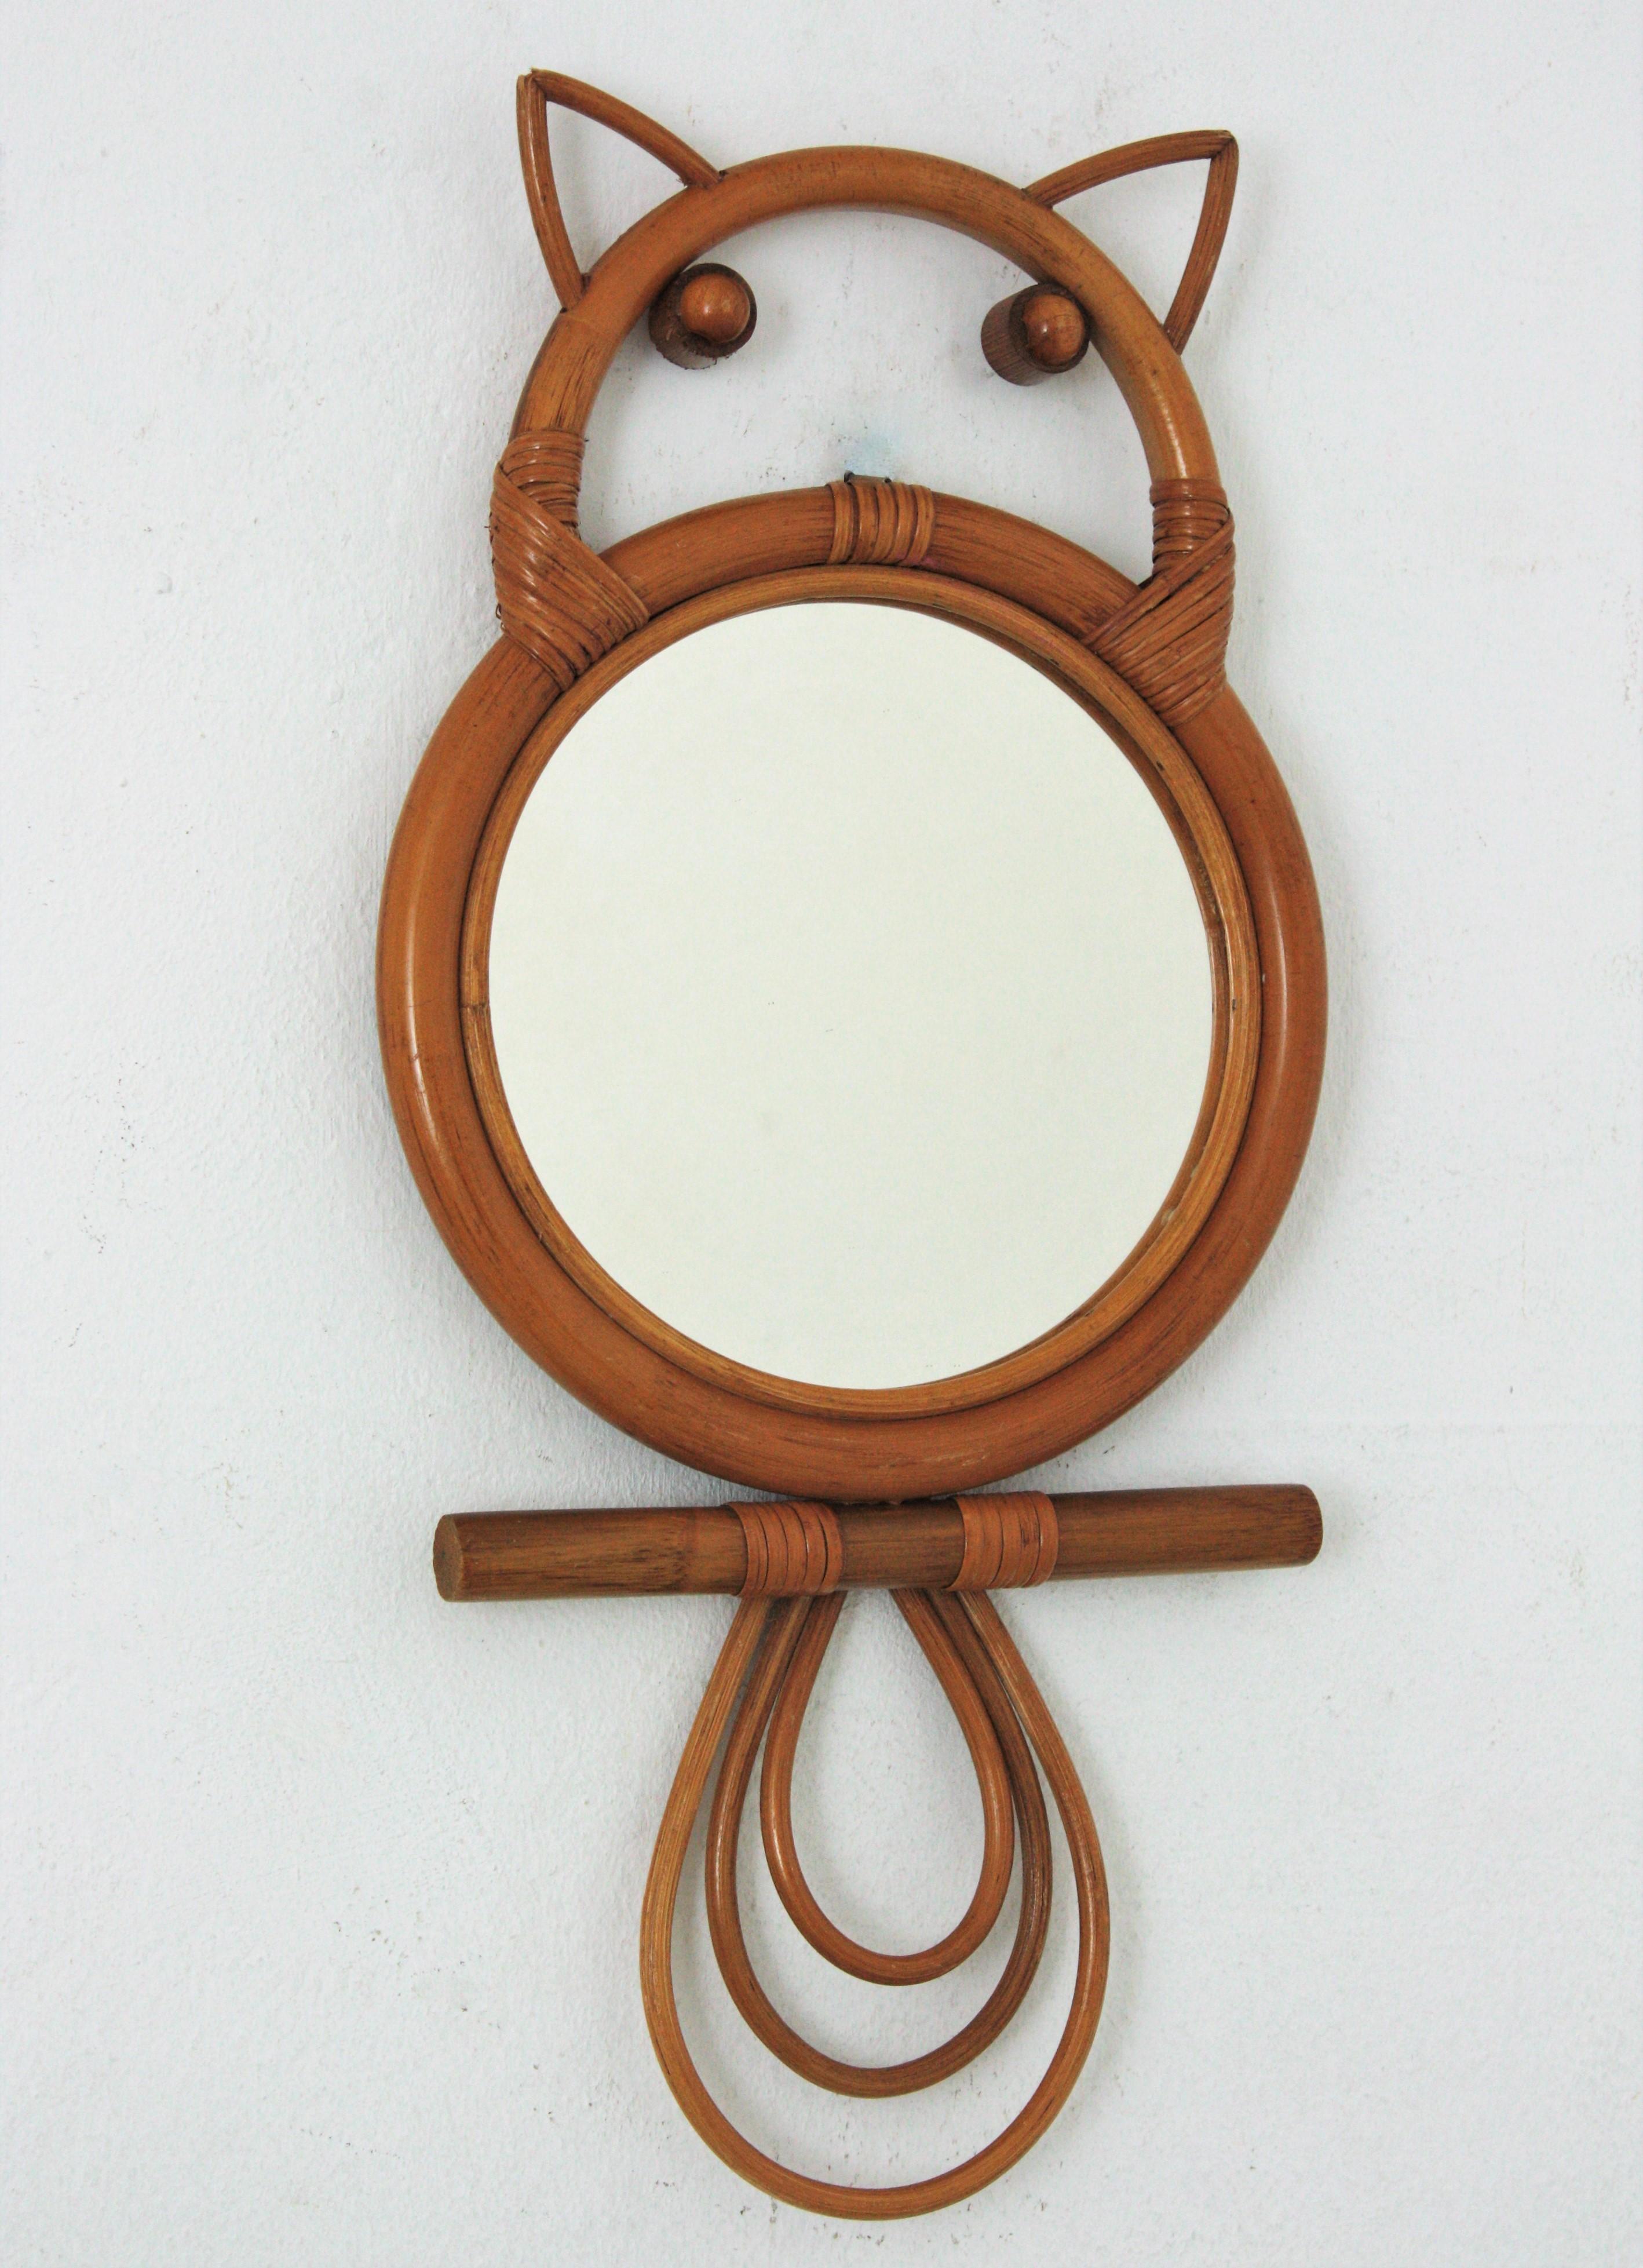 A cool French Riviera owl shaped bamboo and rattan mirror handcrafted in France at the 1950s.
This mirror is lovely to place it alone at a kids room but it will be a nice addition as a part of a rattan mirrors collection creating a big wall